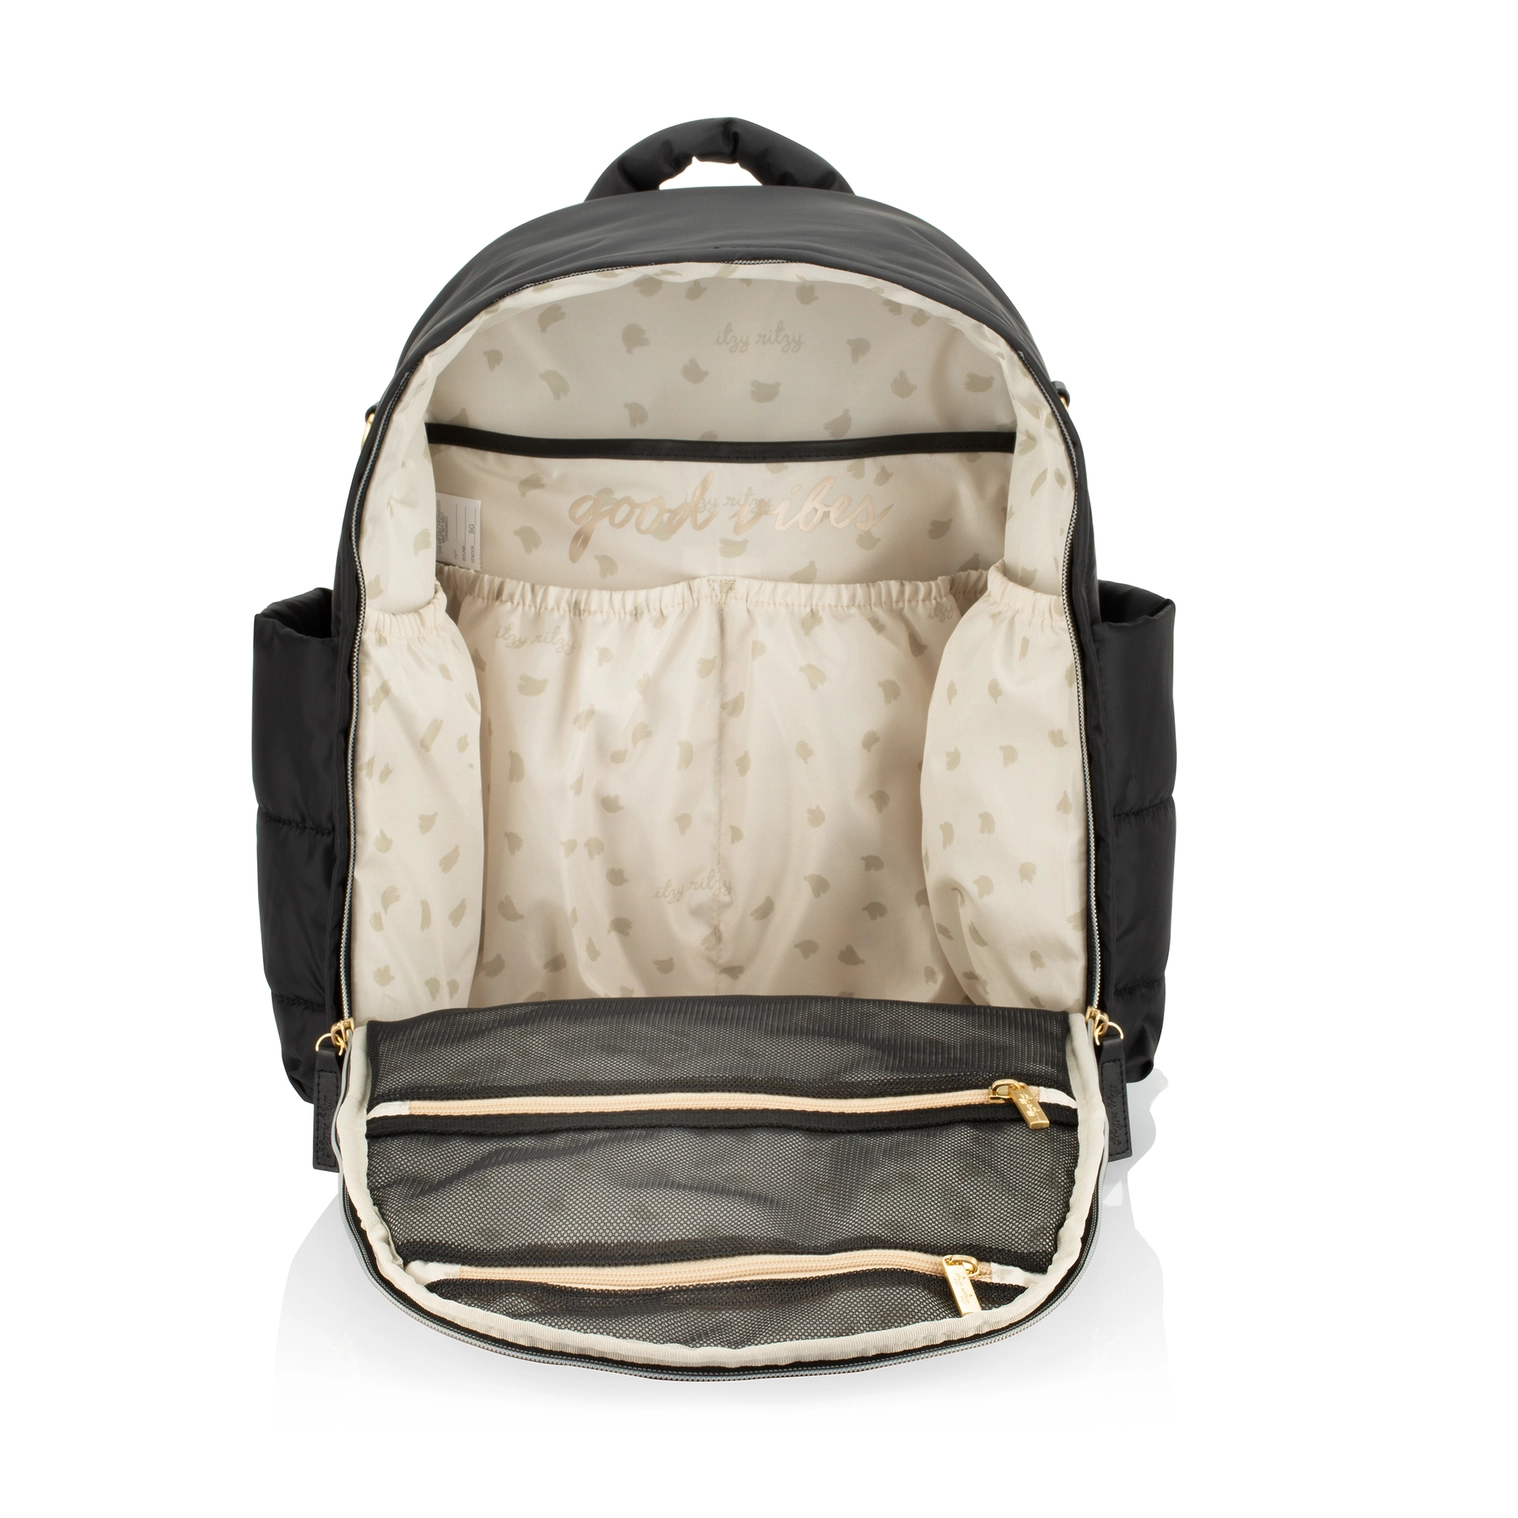 Midnight Like A Dream Backpack Diaper Bag - Itzy Ritzy